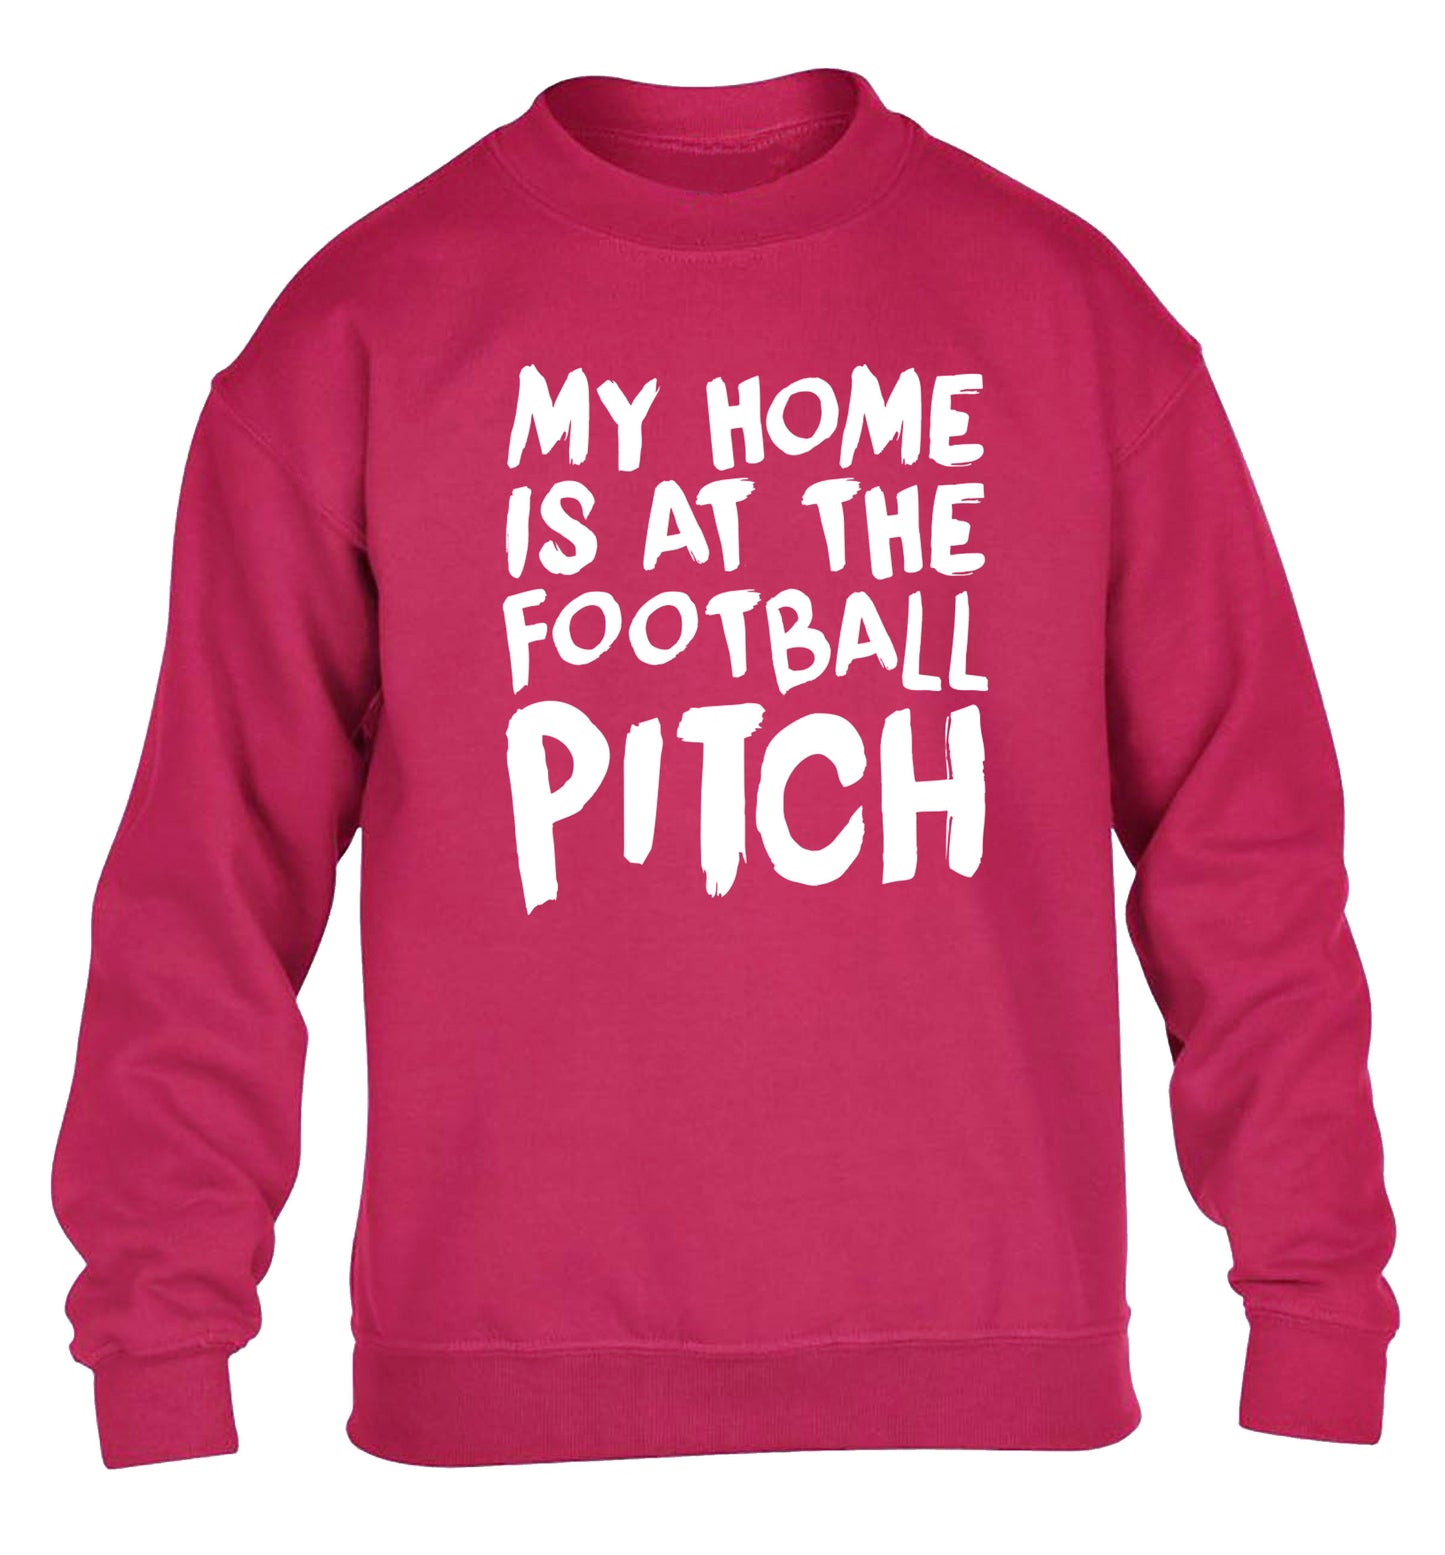 My home is at the football pitch children's pink sweater 12-14 Years